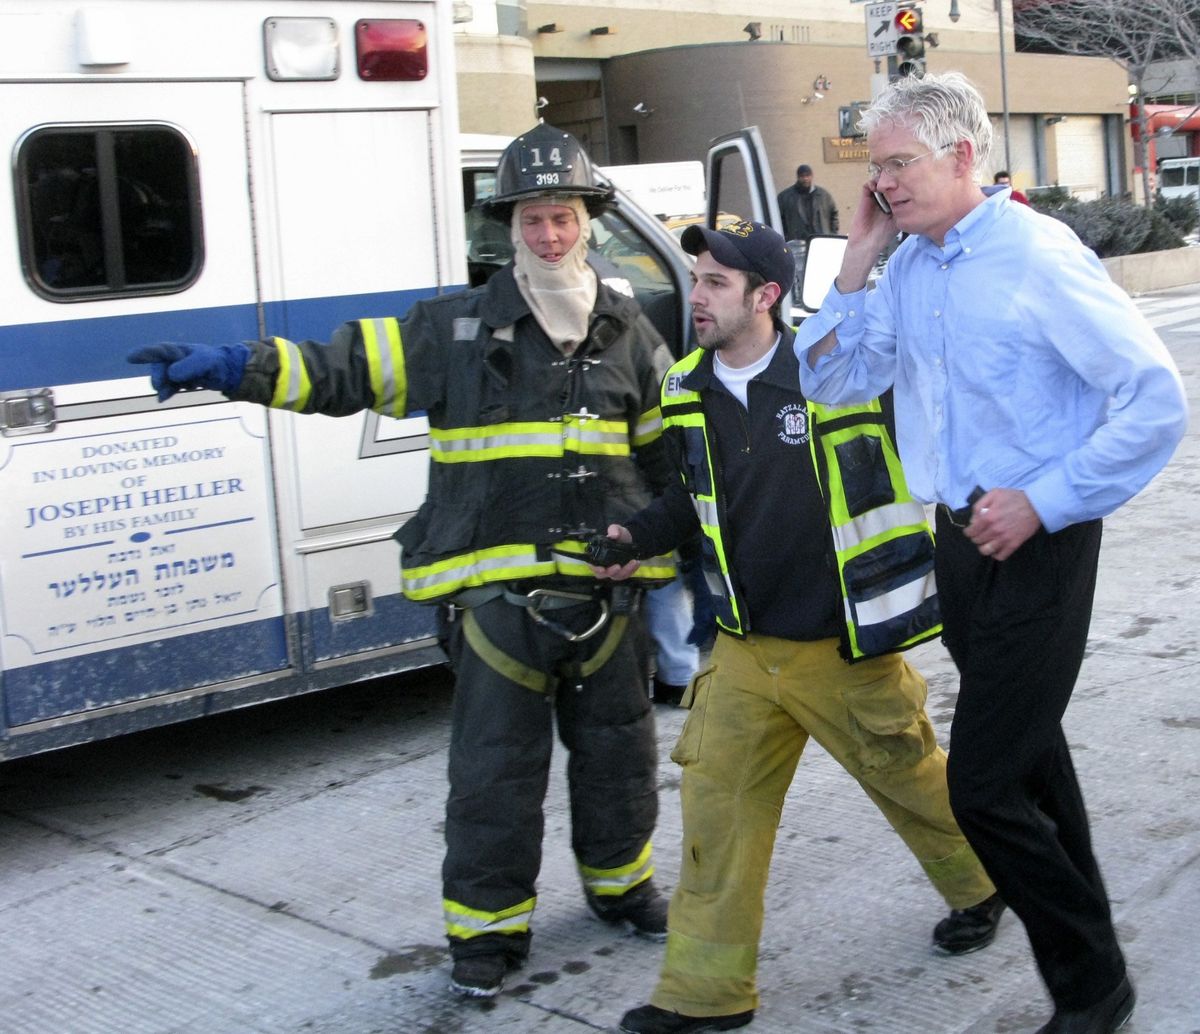 Authorities move a passenger to a waiting ambulance Thursday. (Associated Press / The Spokesman-Review)